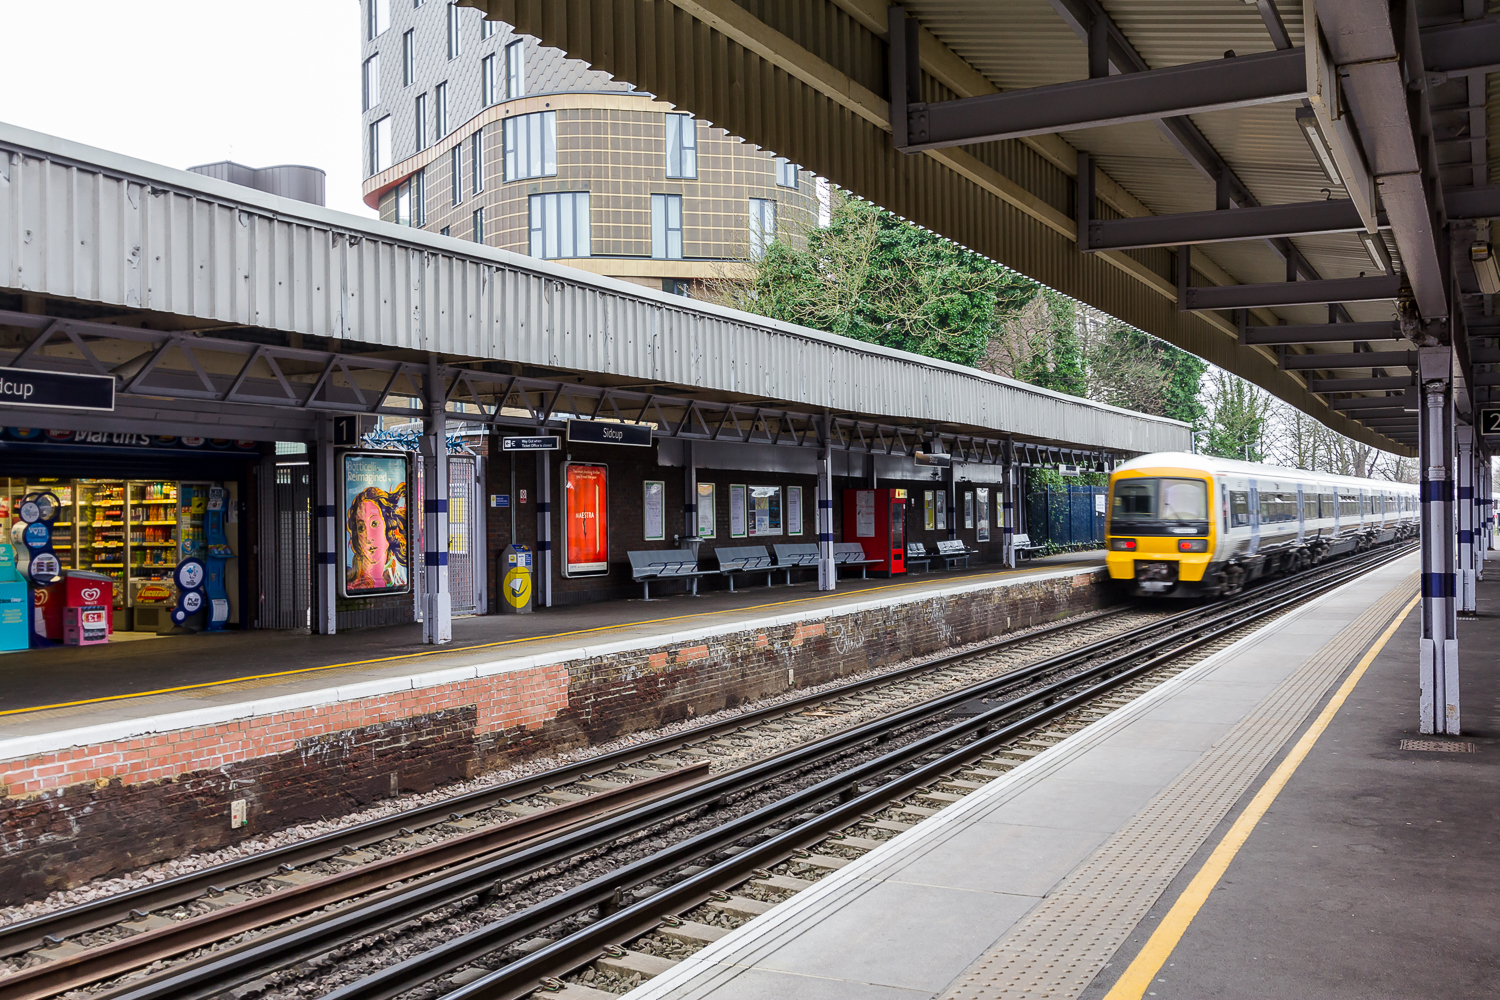 Sidcup train station